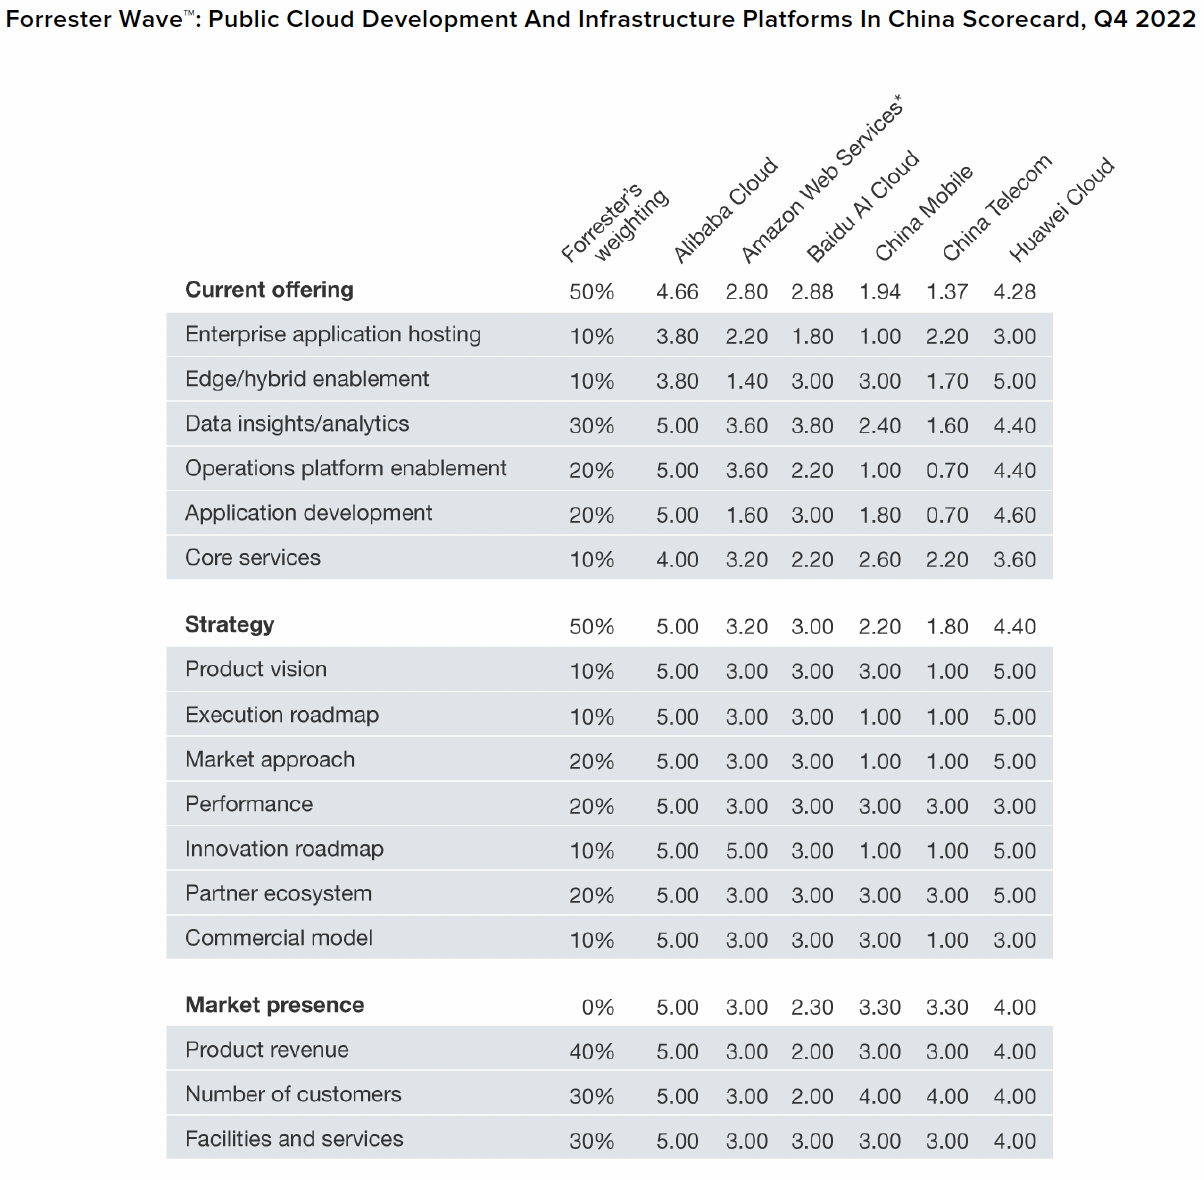 Forrester_Wave_Public_Cloud_Development_And_Infrastructure_Platforms_In China_Scorecard_Q4_2022.png